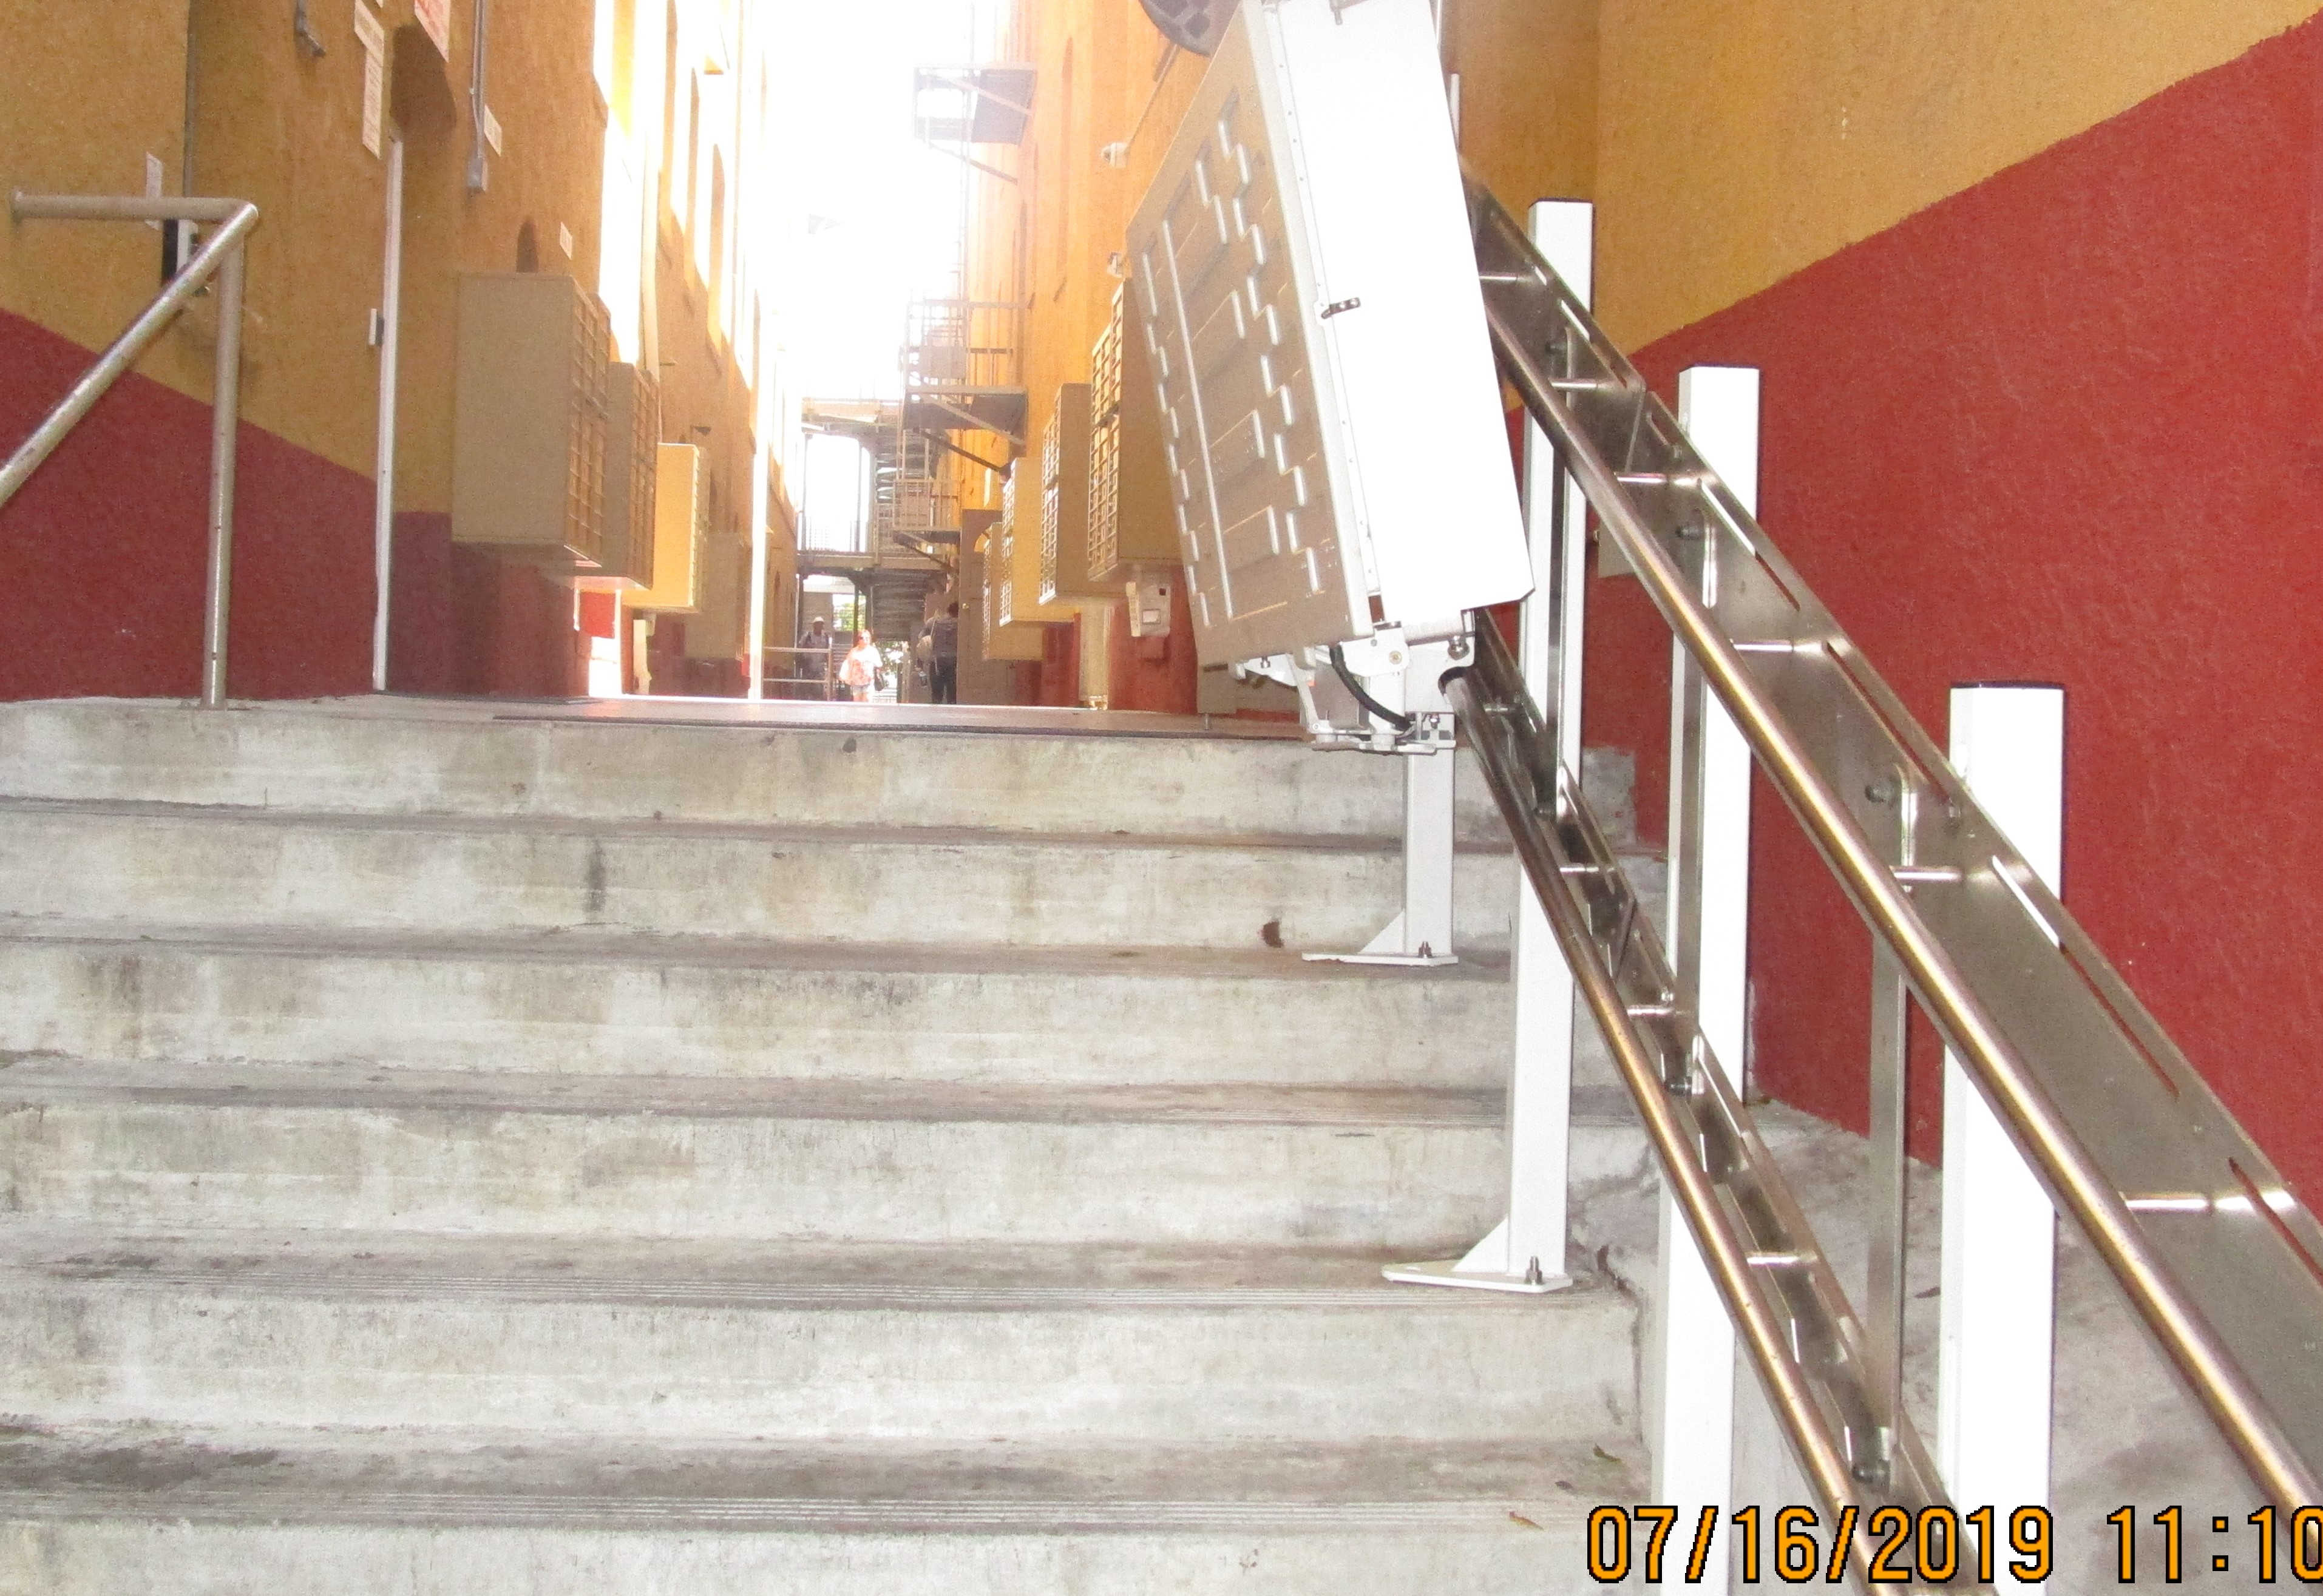 View of concrete steps with handrails.